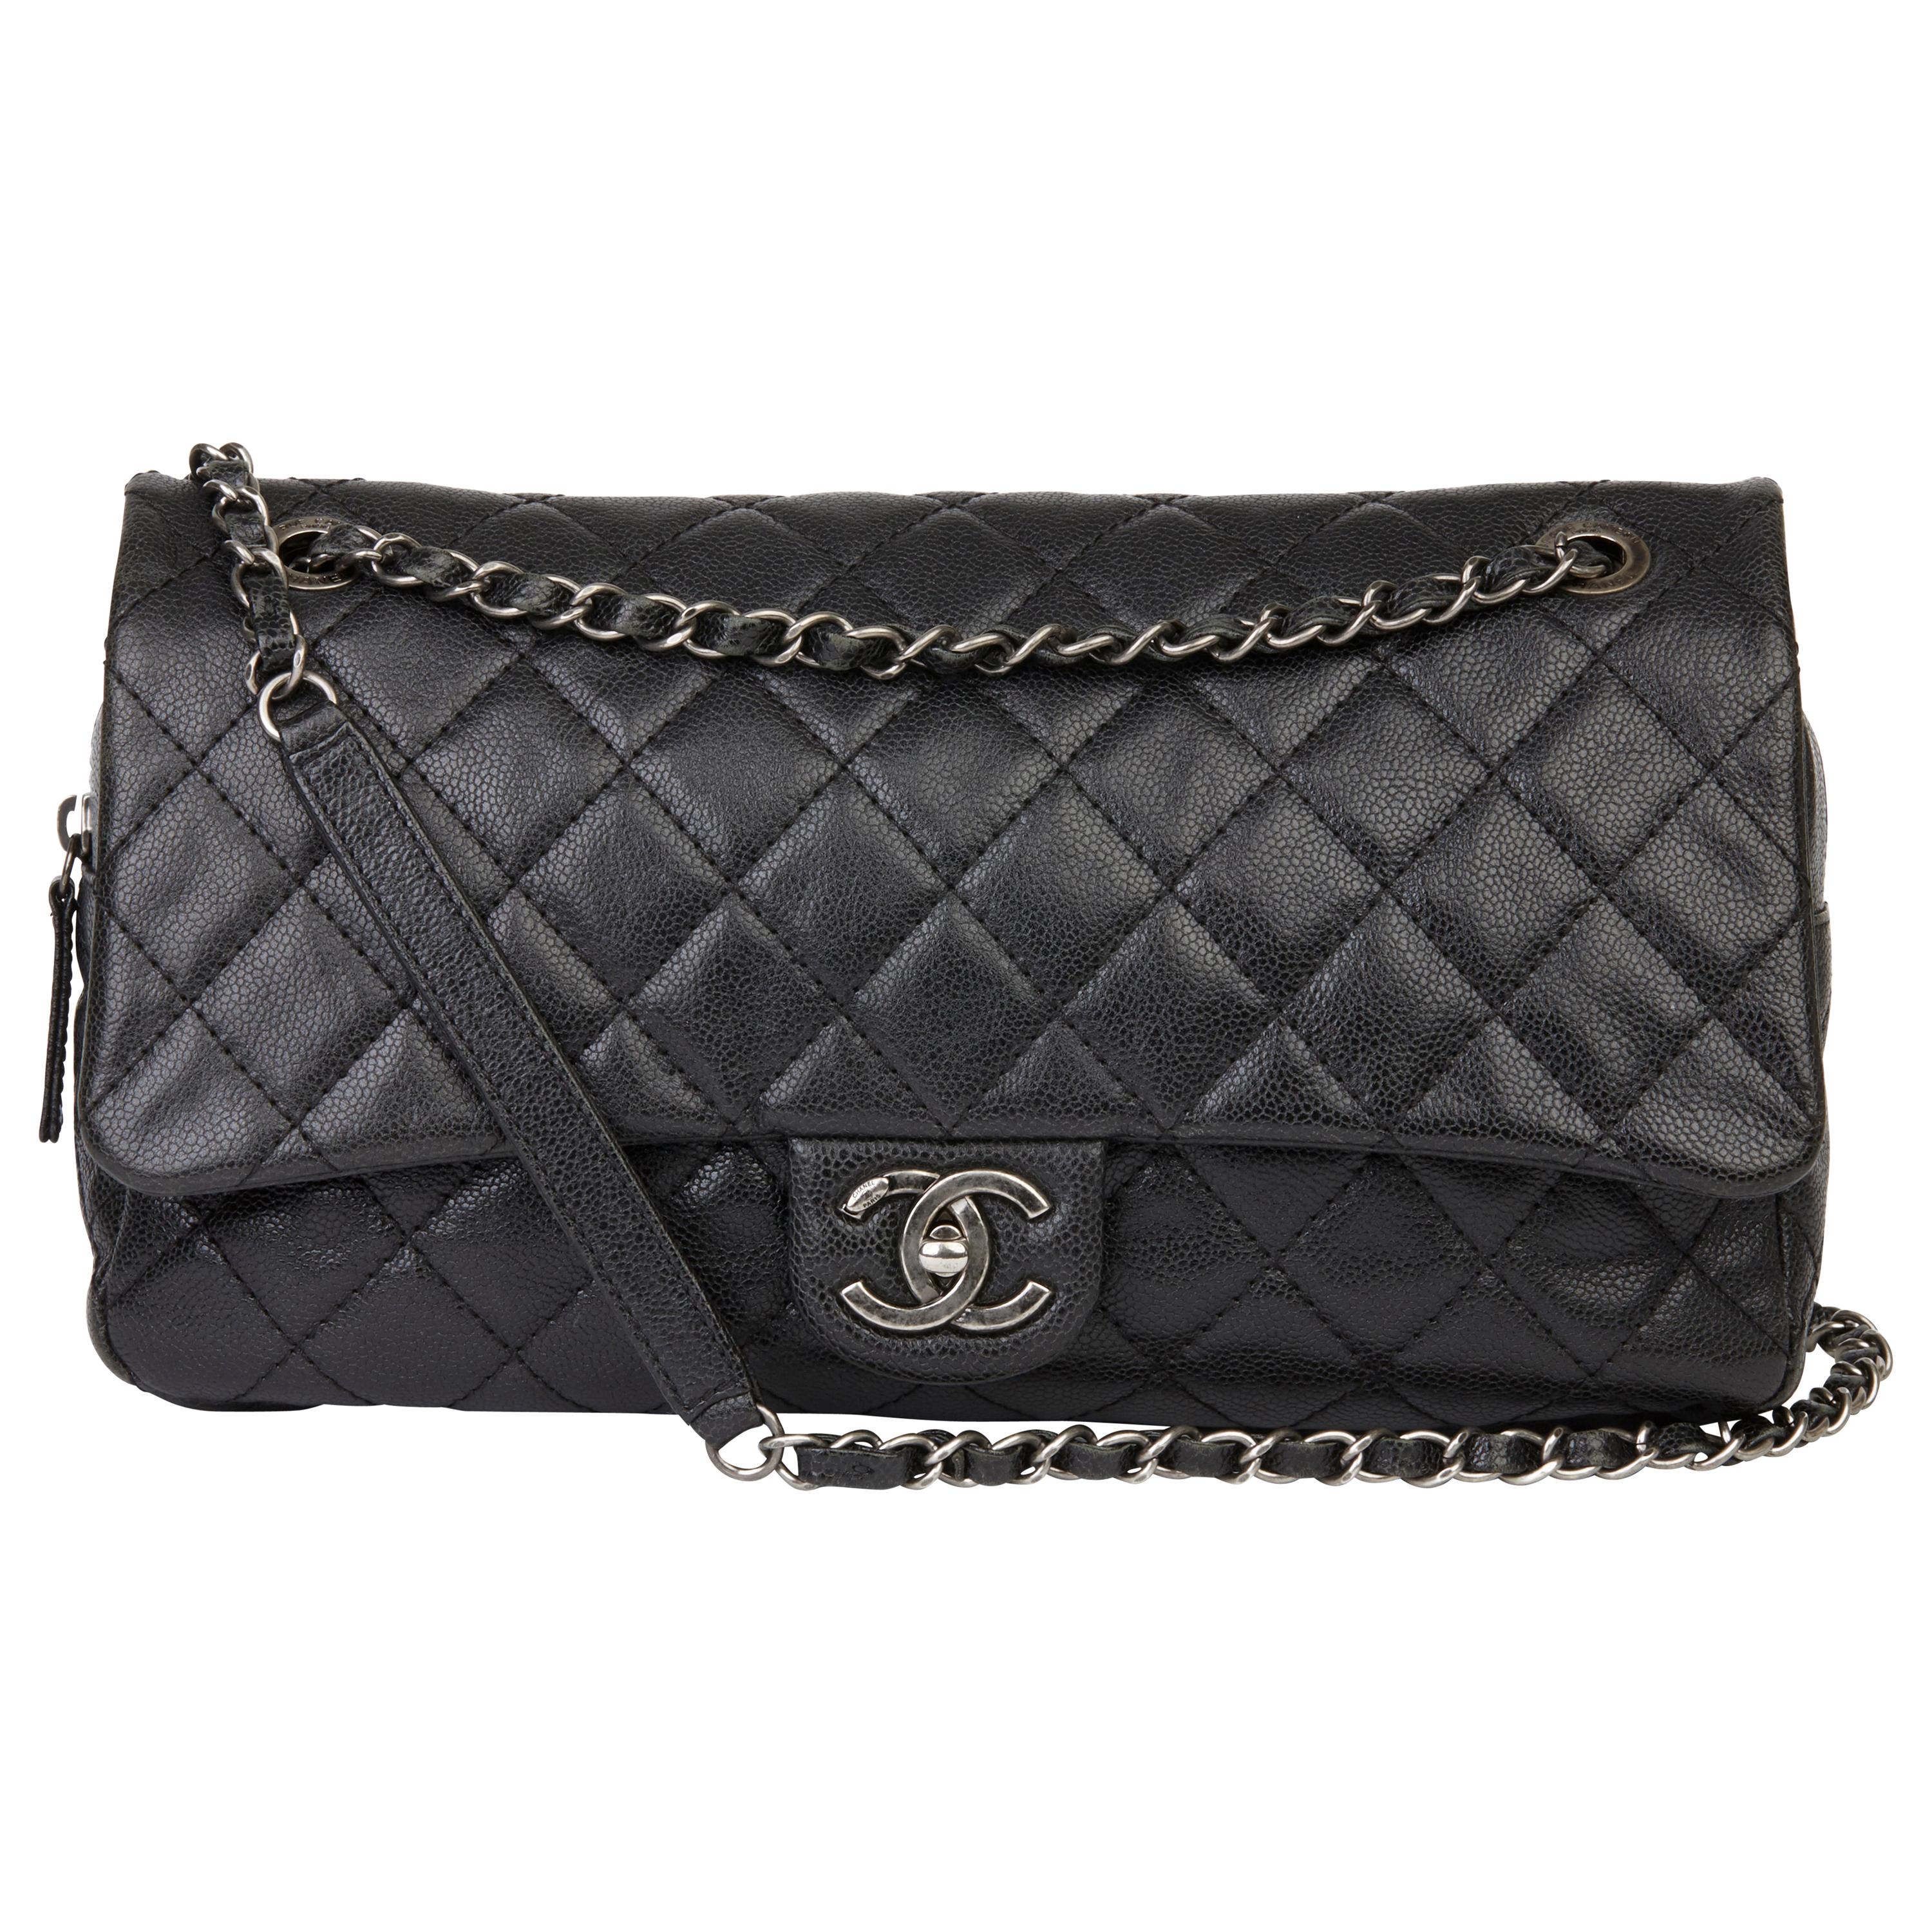 21012 Chanel Black Quilted Caviar Leather Jumbo Easy Carry Flap Bag